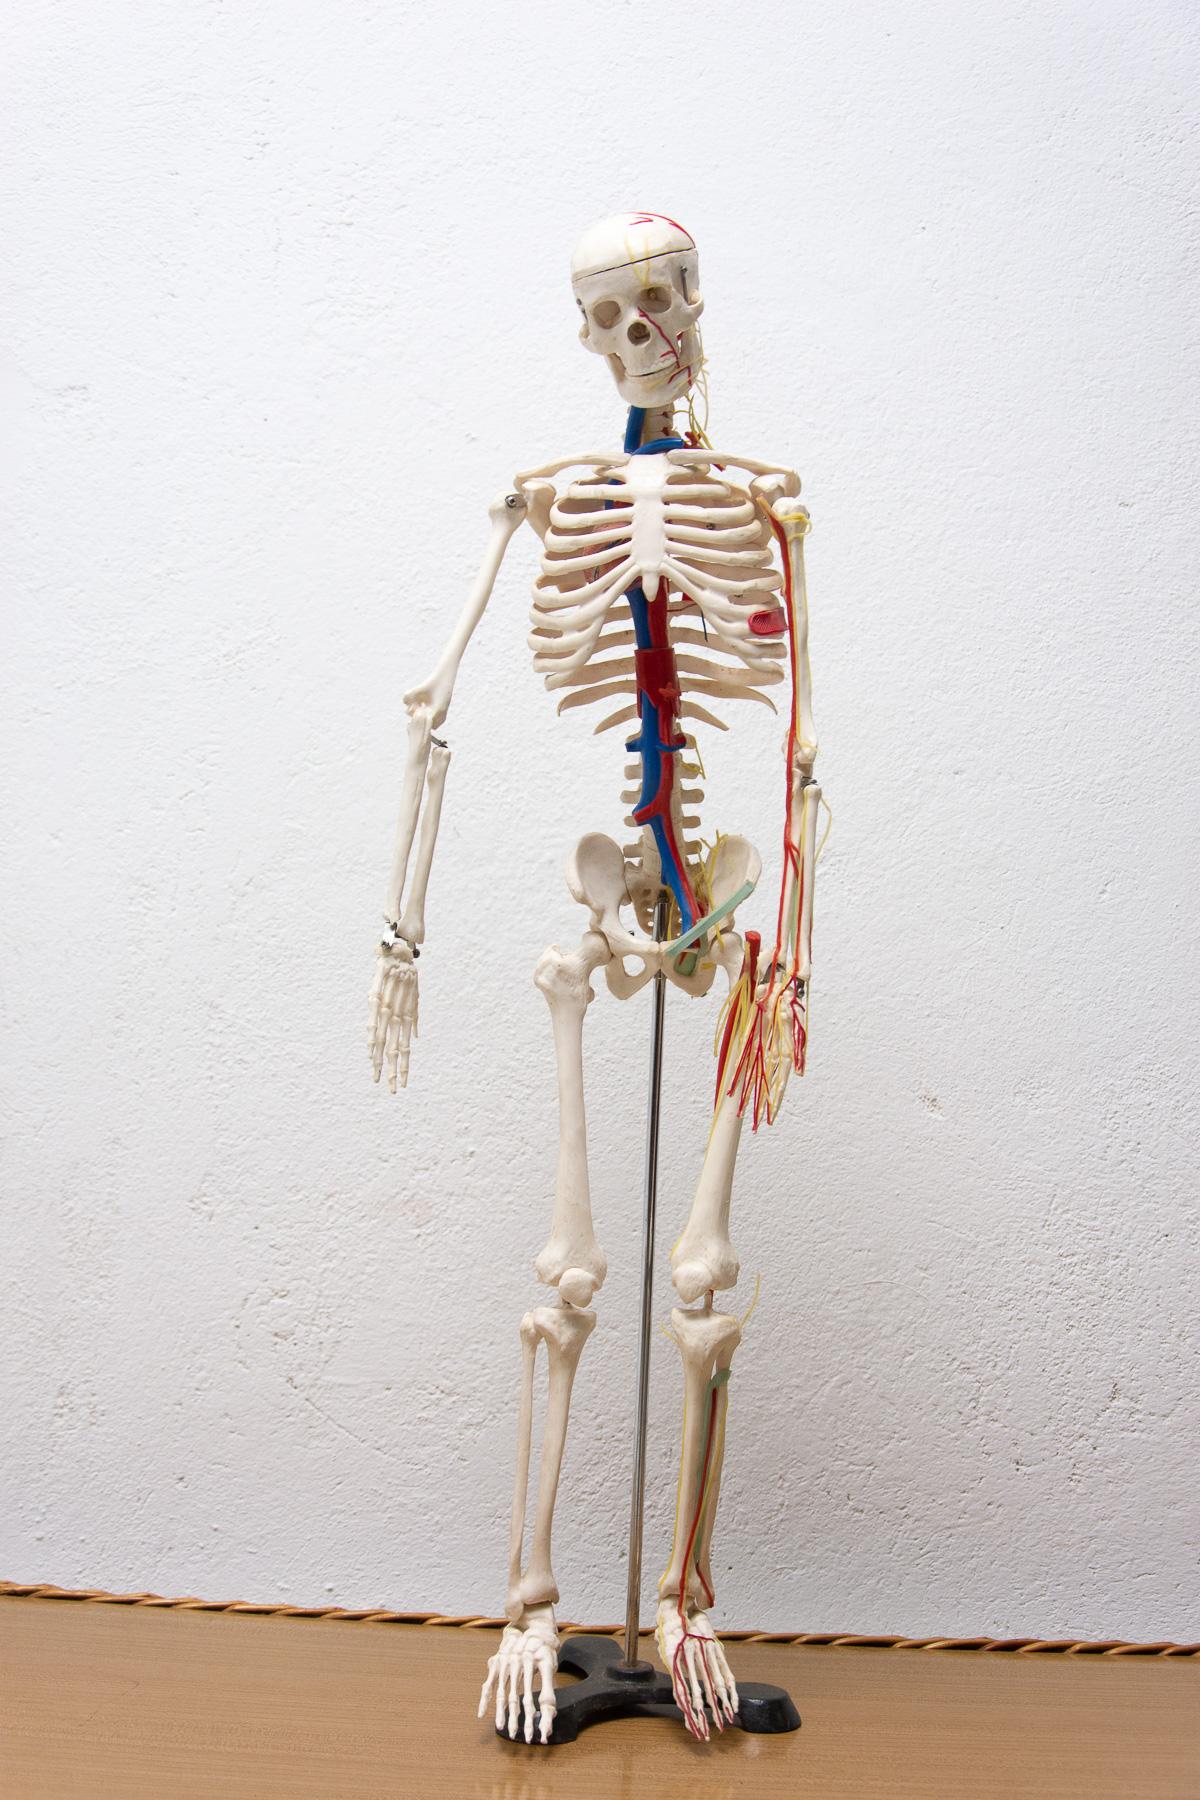 This school aid of a human skeleton was made of plastic in the 1960s in Czechoslovakia. It is in very good condition, shows slight signs of age and use

Measures: Height: 86 cm

Width: 21 cm

Depth: 23 cm.